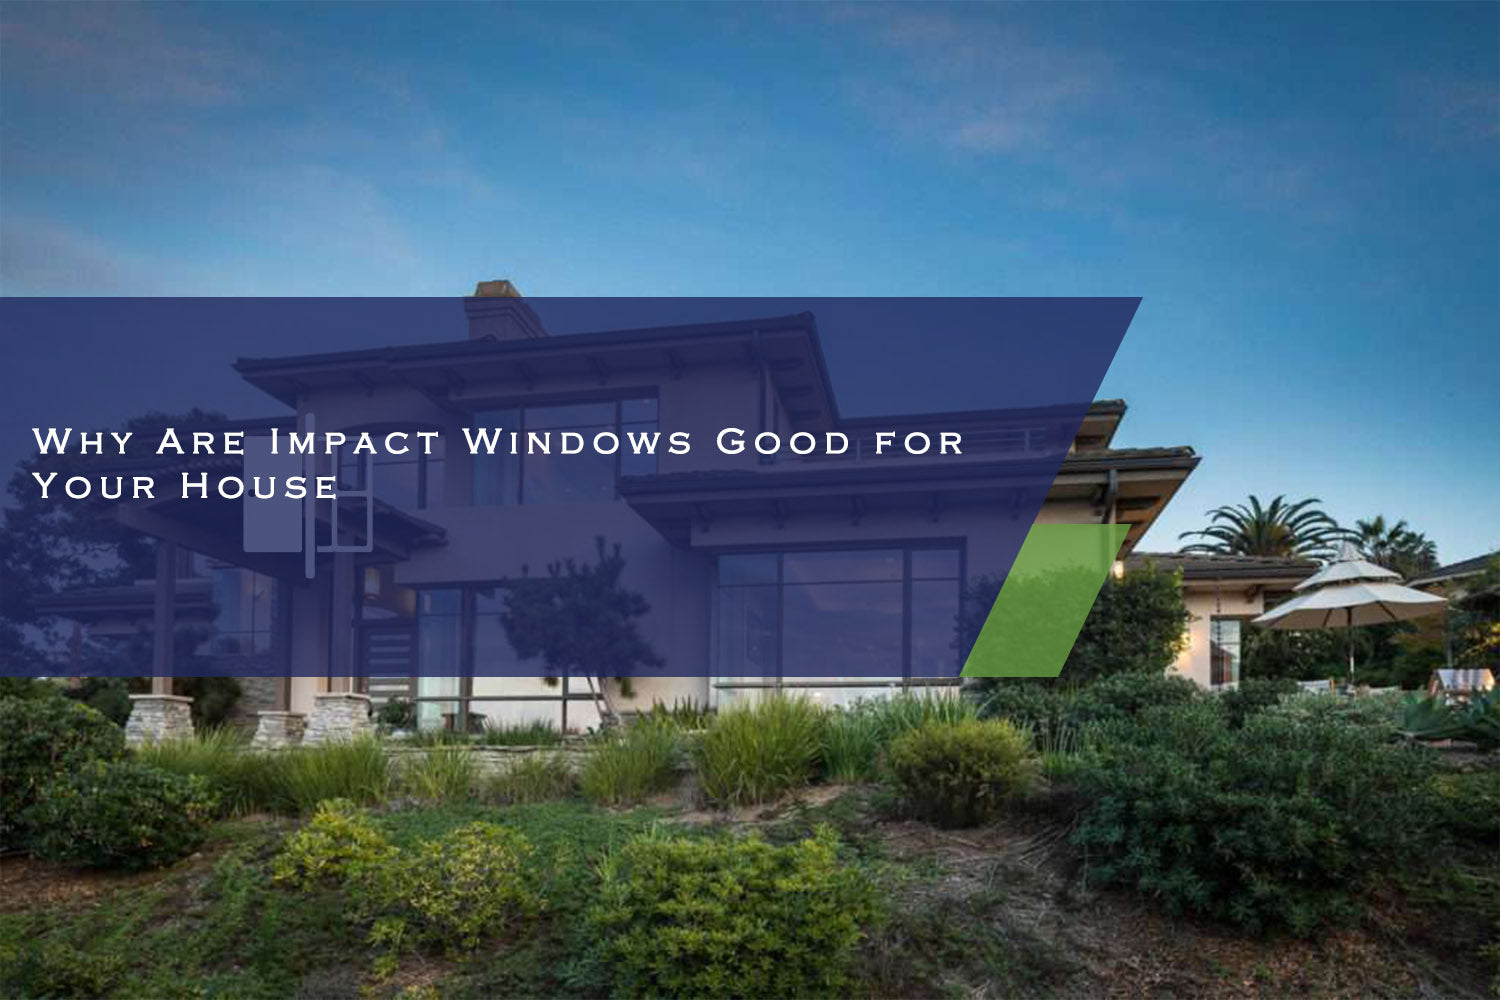 Why Are Impact Windows Good for Your House?